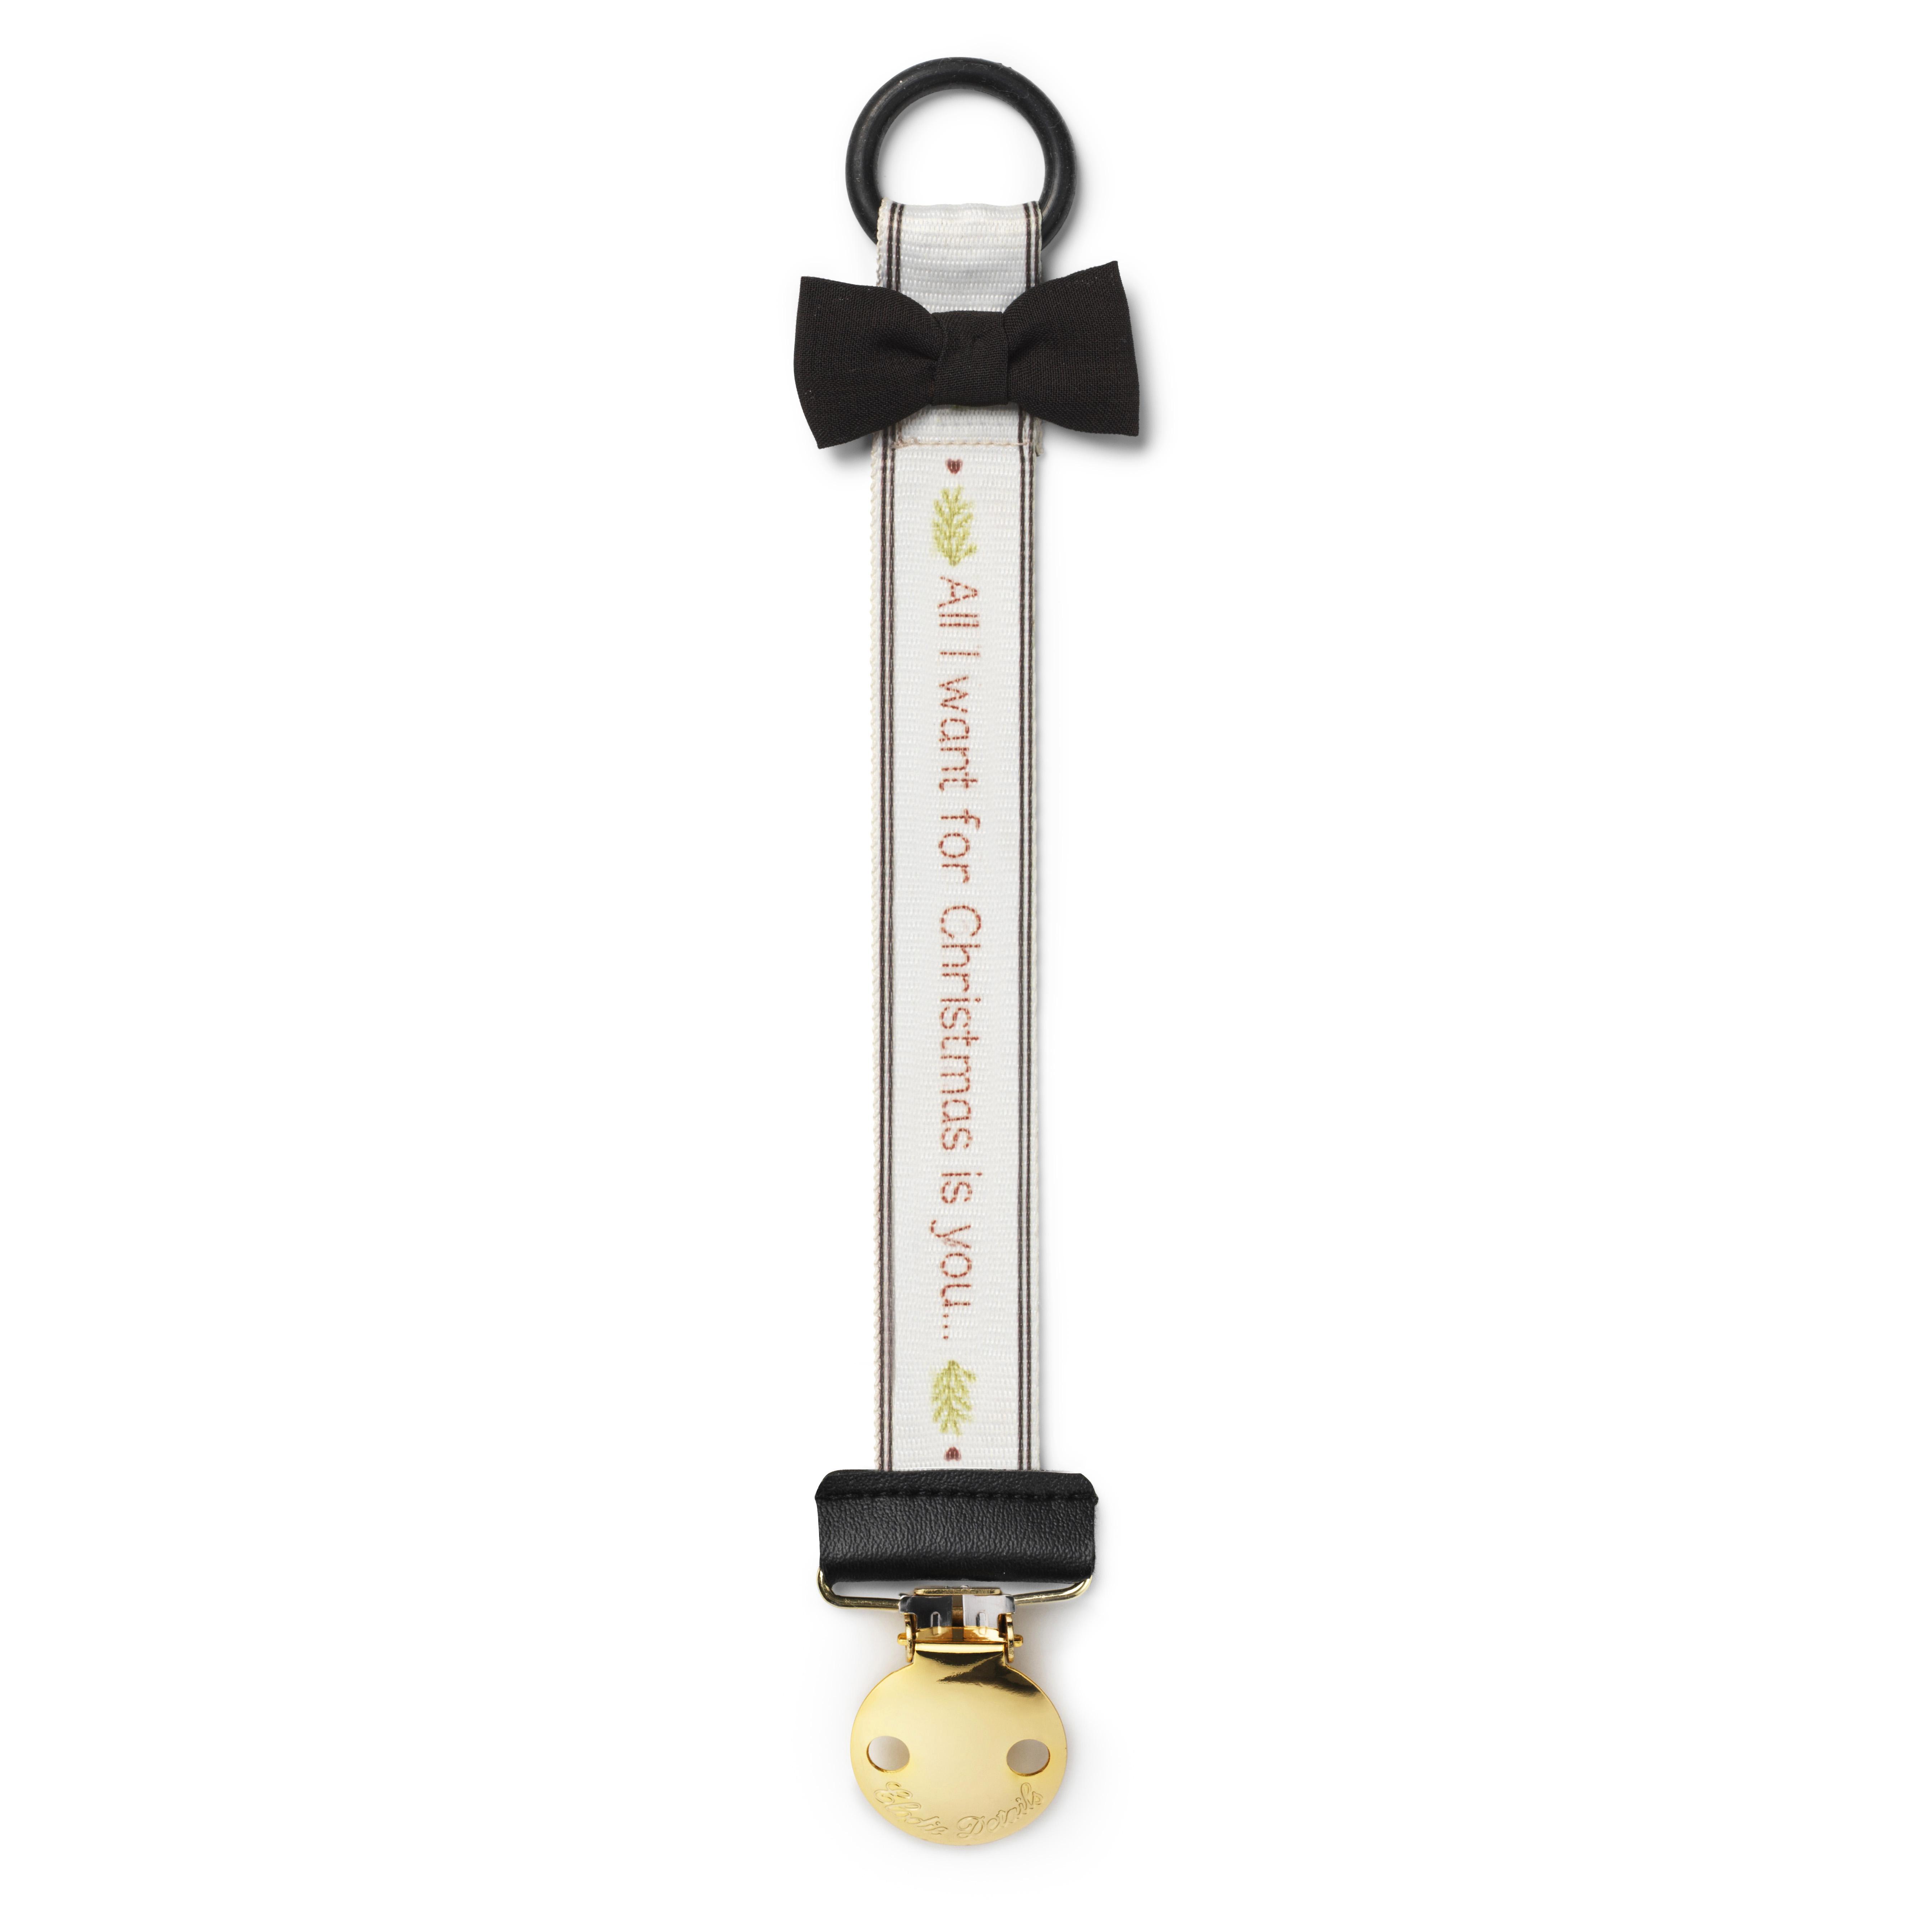 Elodie Details Pacifier Clip  - Joy to the world - Elodie Details